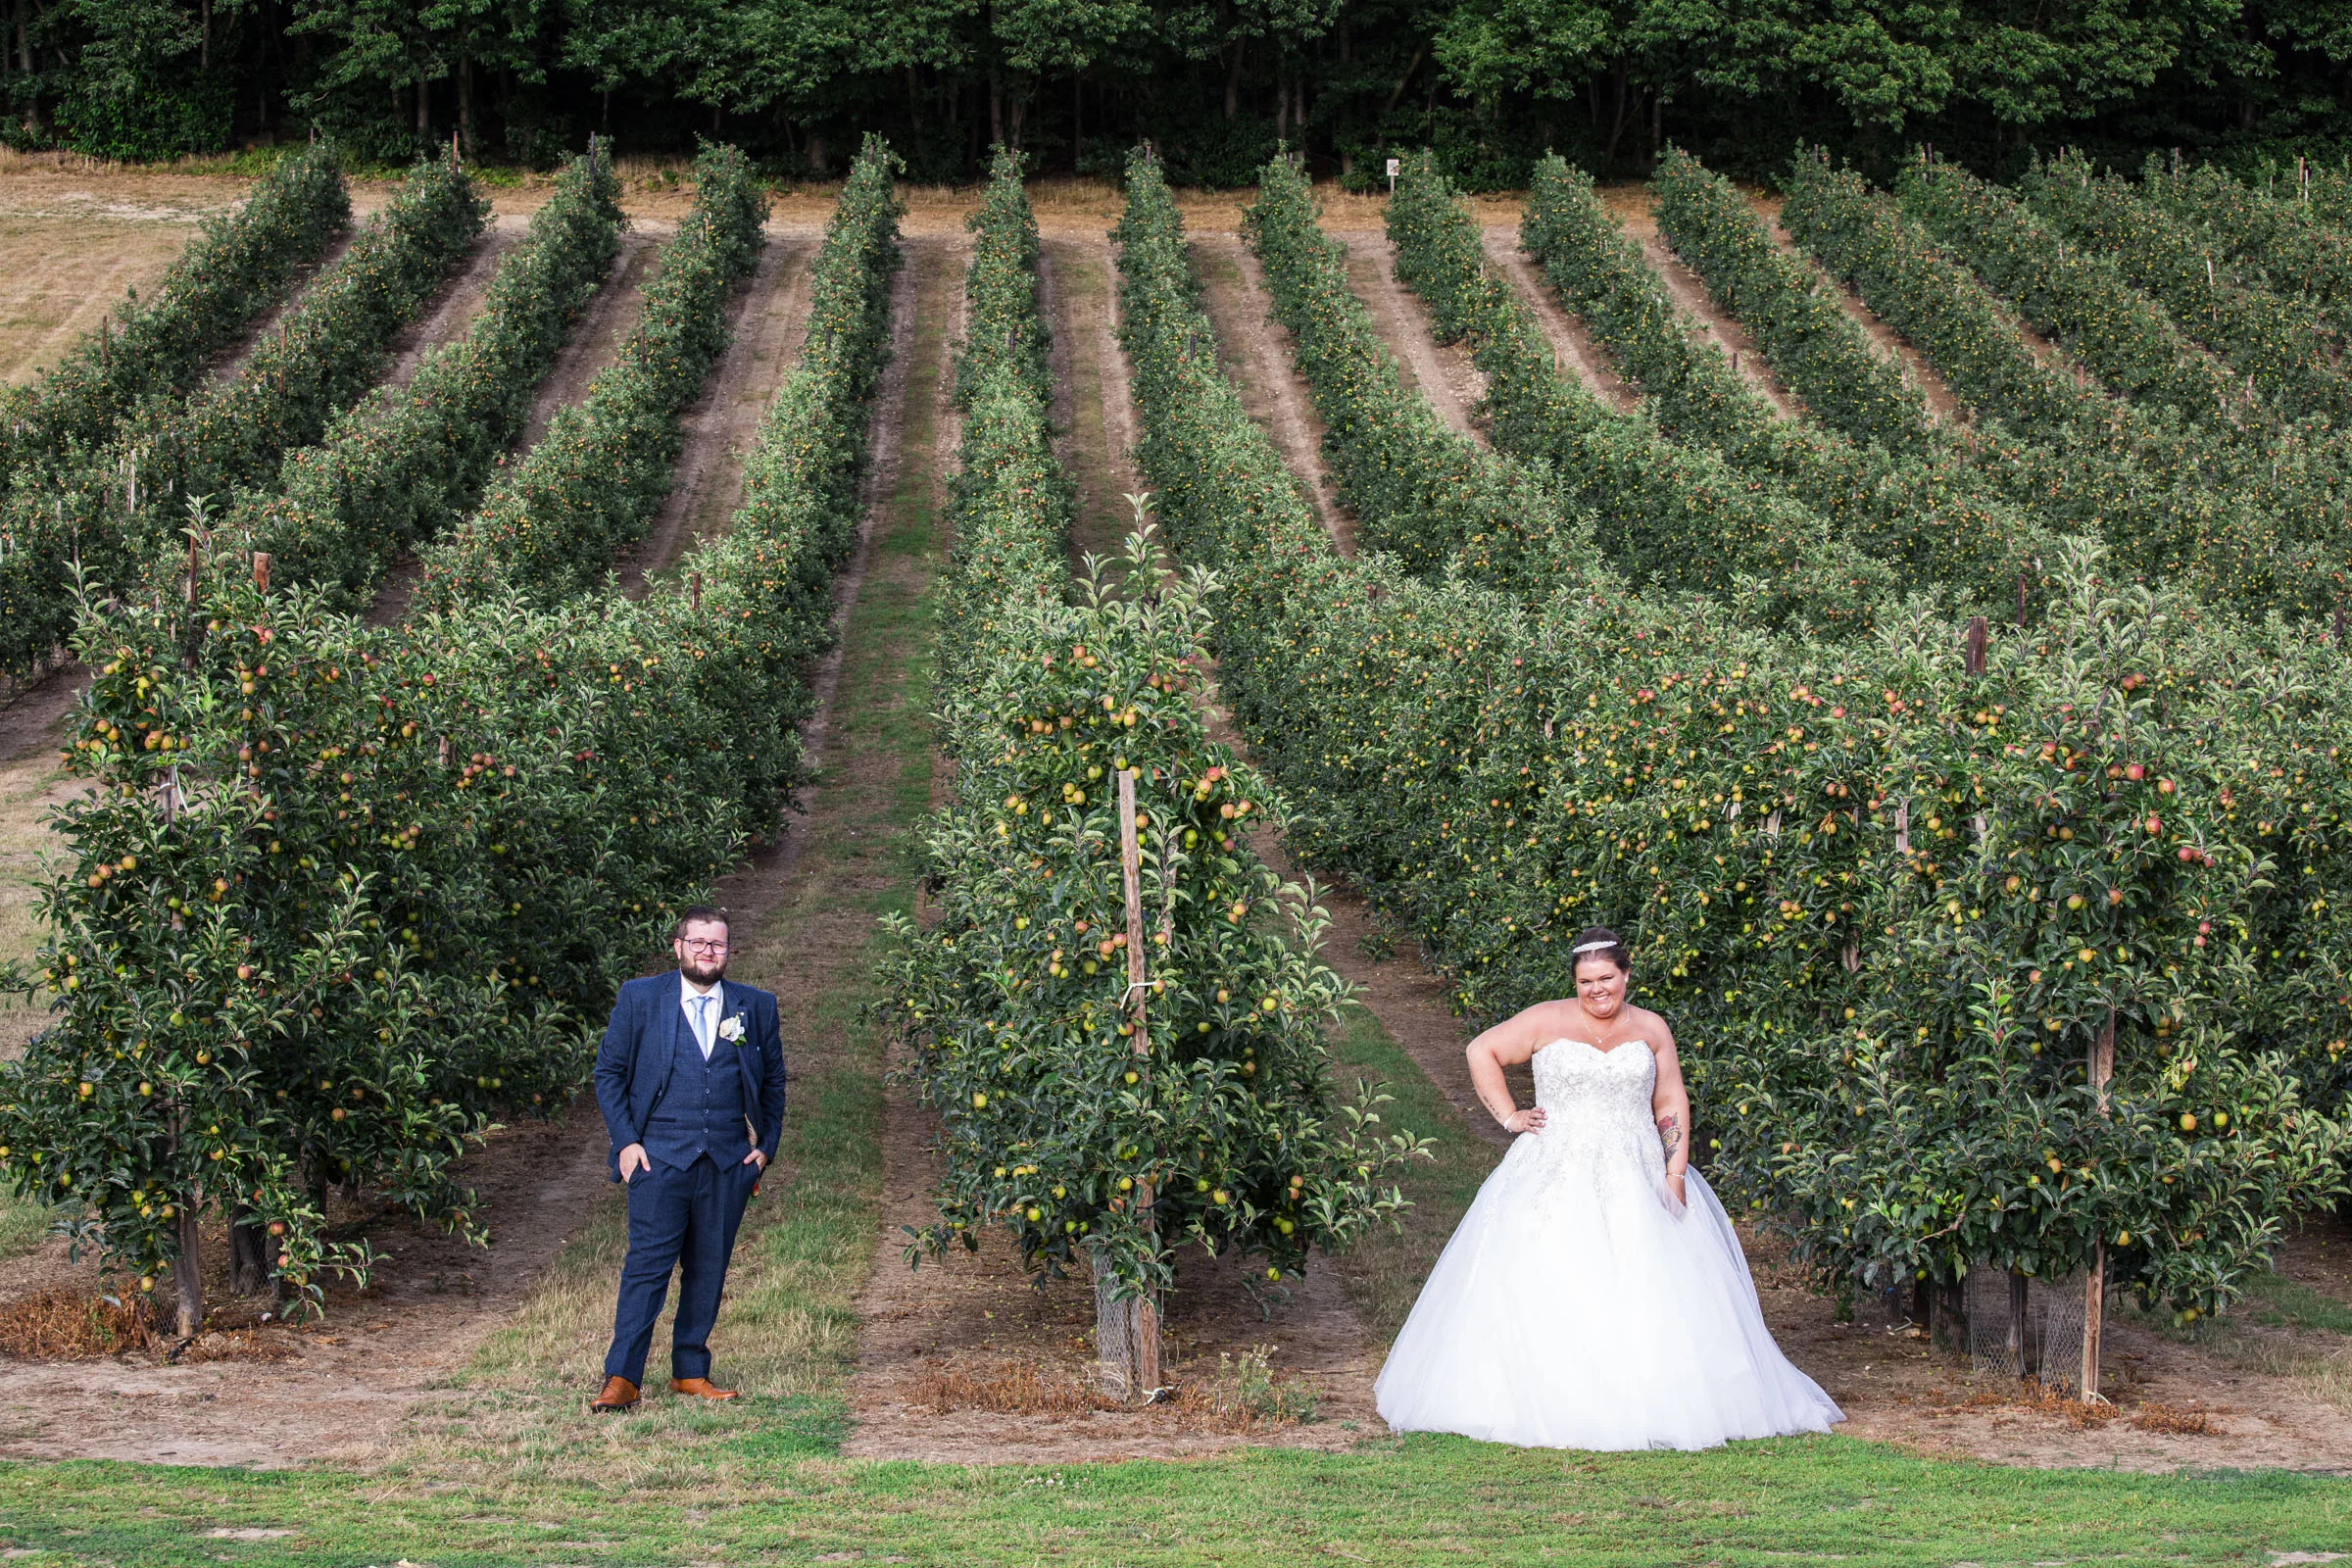 Gorgeous Kent wedding photography featuring the bride and groom surrounded by the natural beauty of the barnyard."